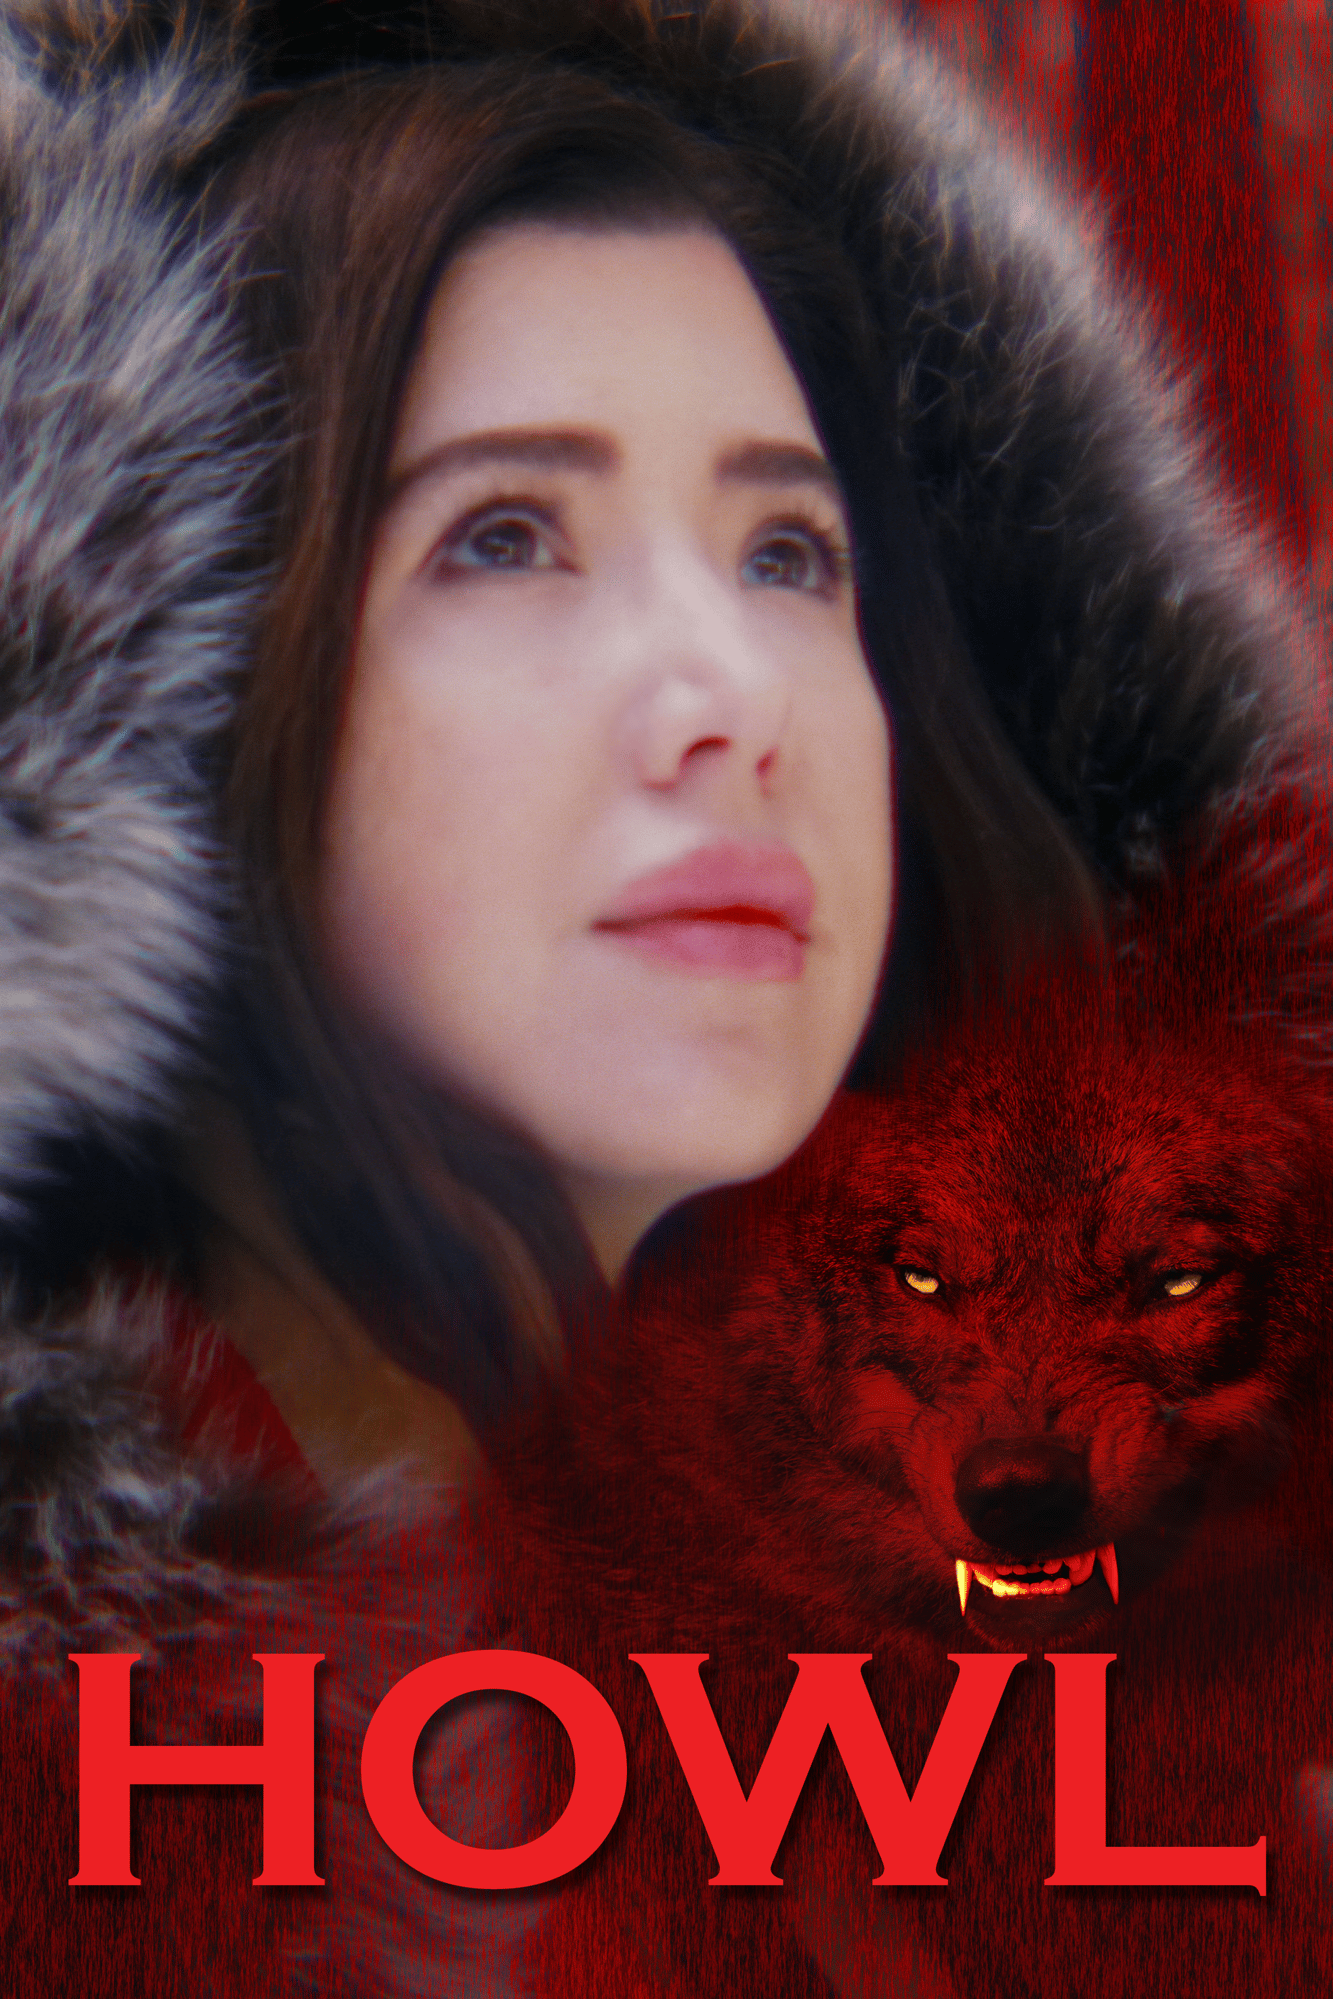 Movie poster for Howl featuring Little Red Riding Hood and a Wolf